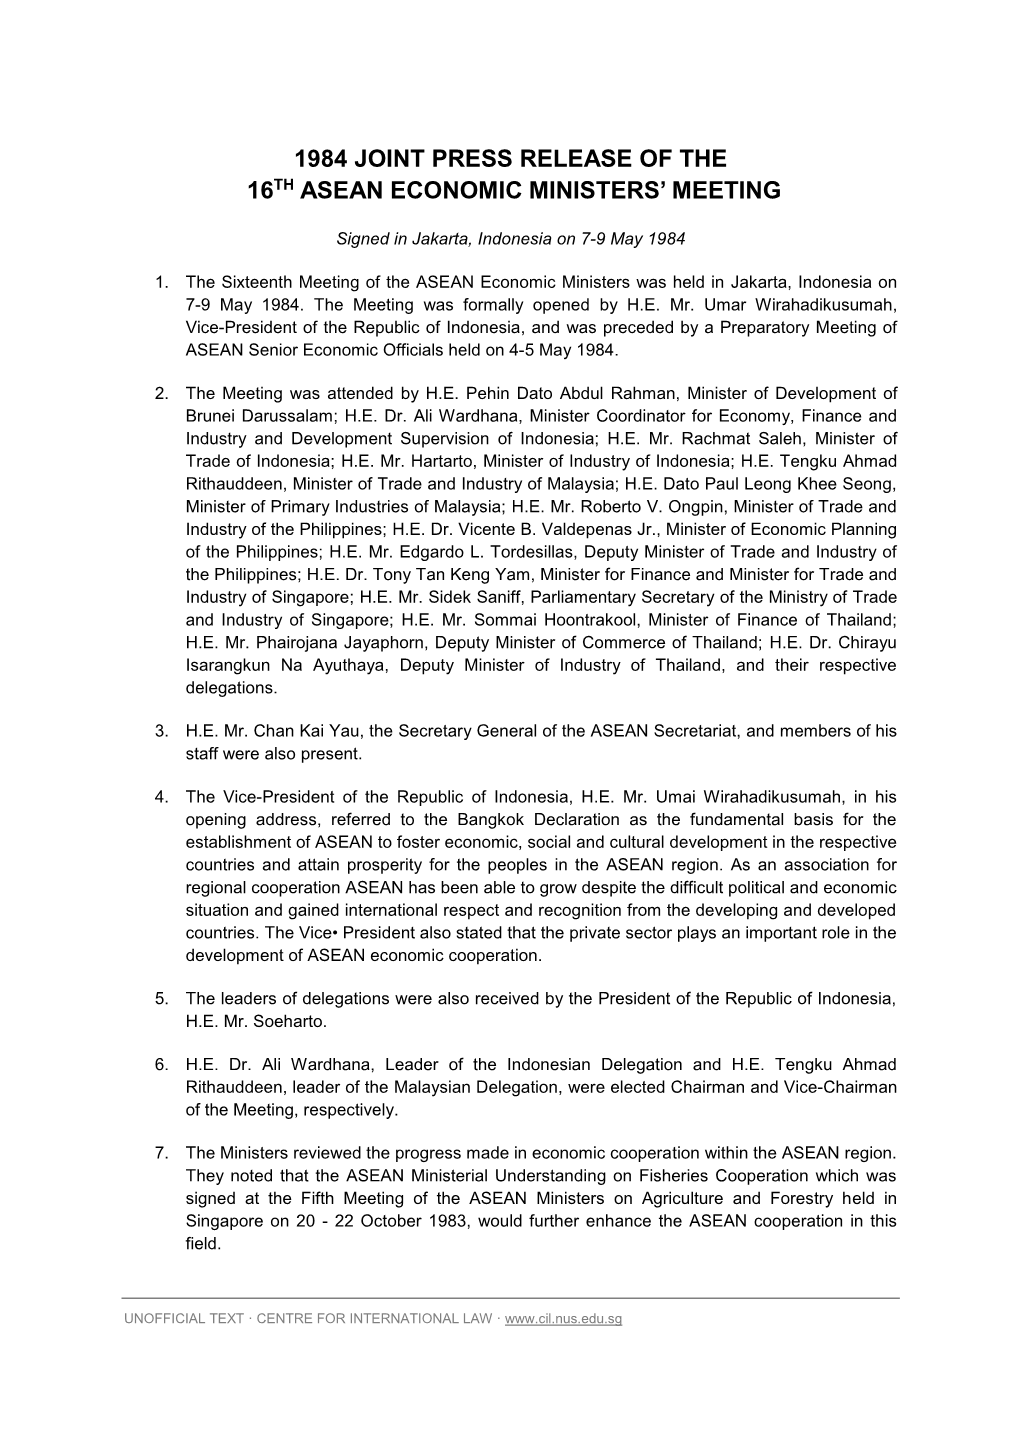 1984 Joint Press Release of the 16Th Asean Economic Ministers’ Meeting